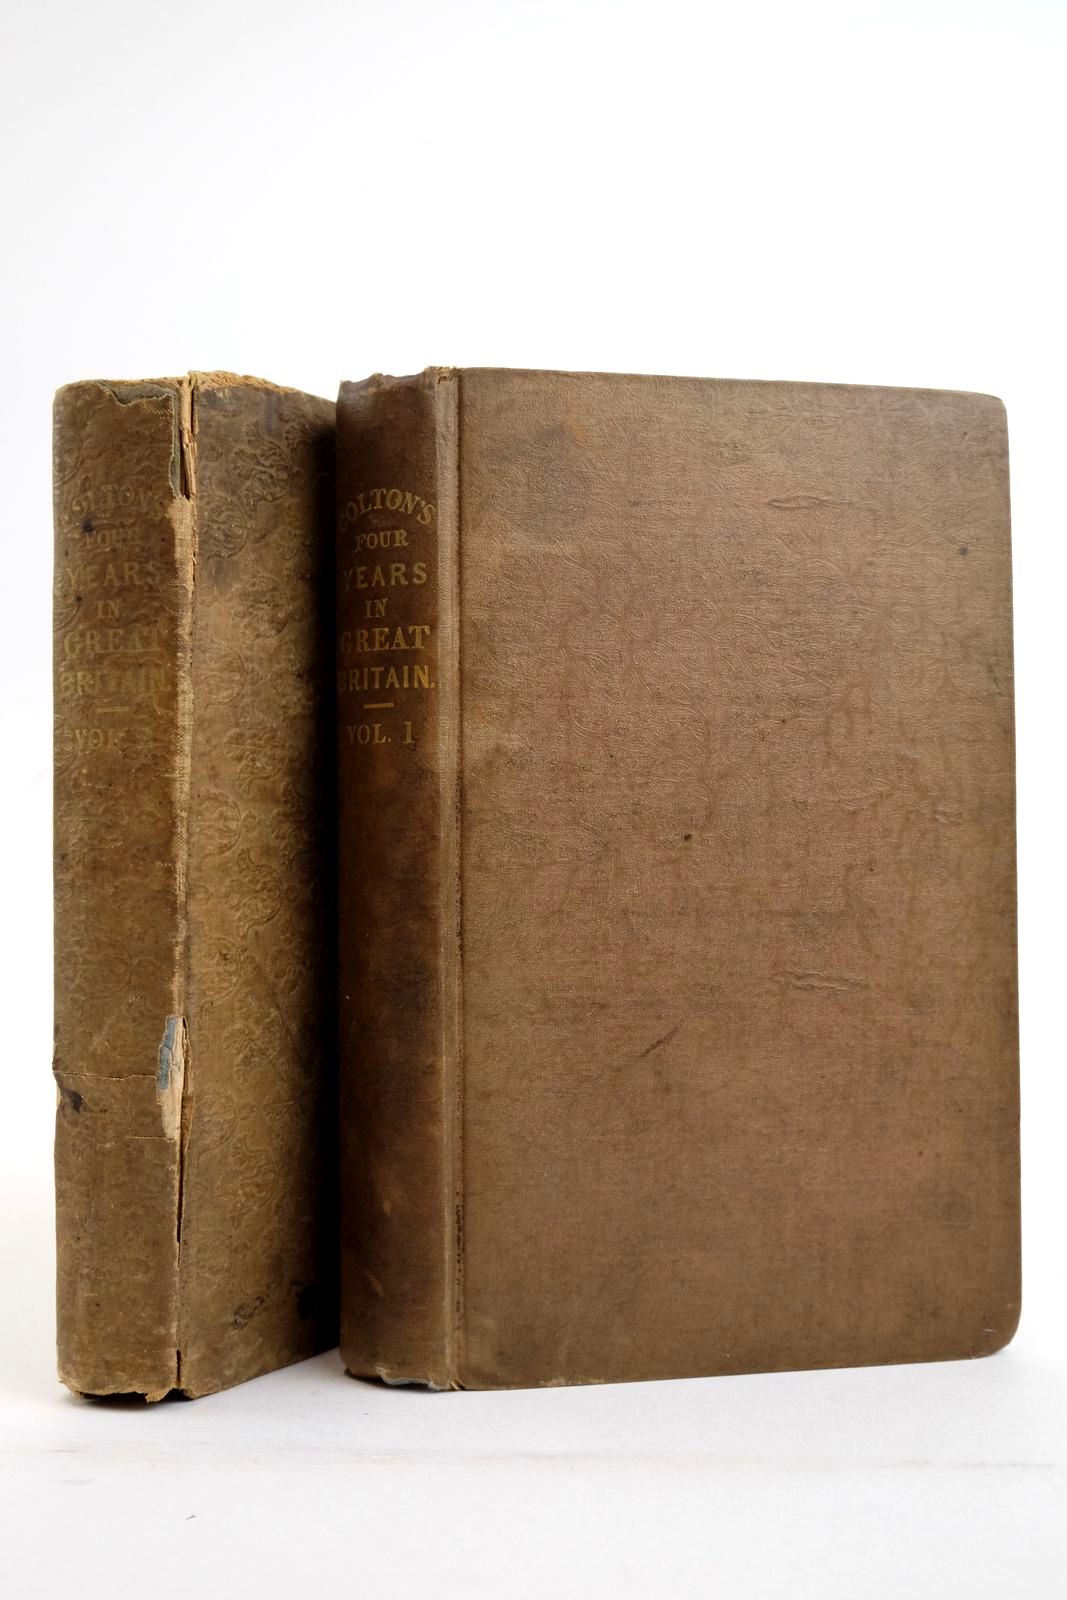 Photo of FOUR YEARS IN GREAT BRITAIN 1831-1835 (2 VOLUMES) written by Colton, Calvin published by Harper And Brothers (STOCK CODE: 2135878)  for sale by Stella & Rose's Books